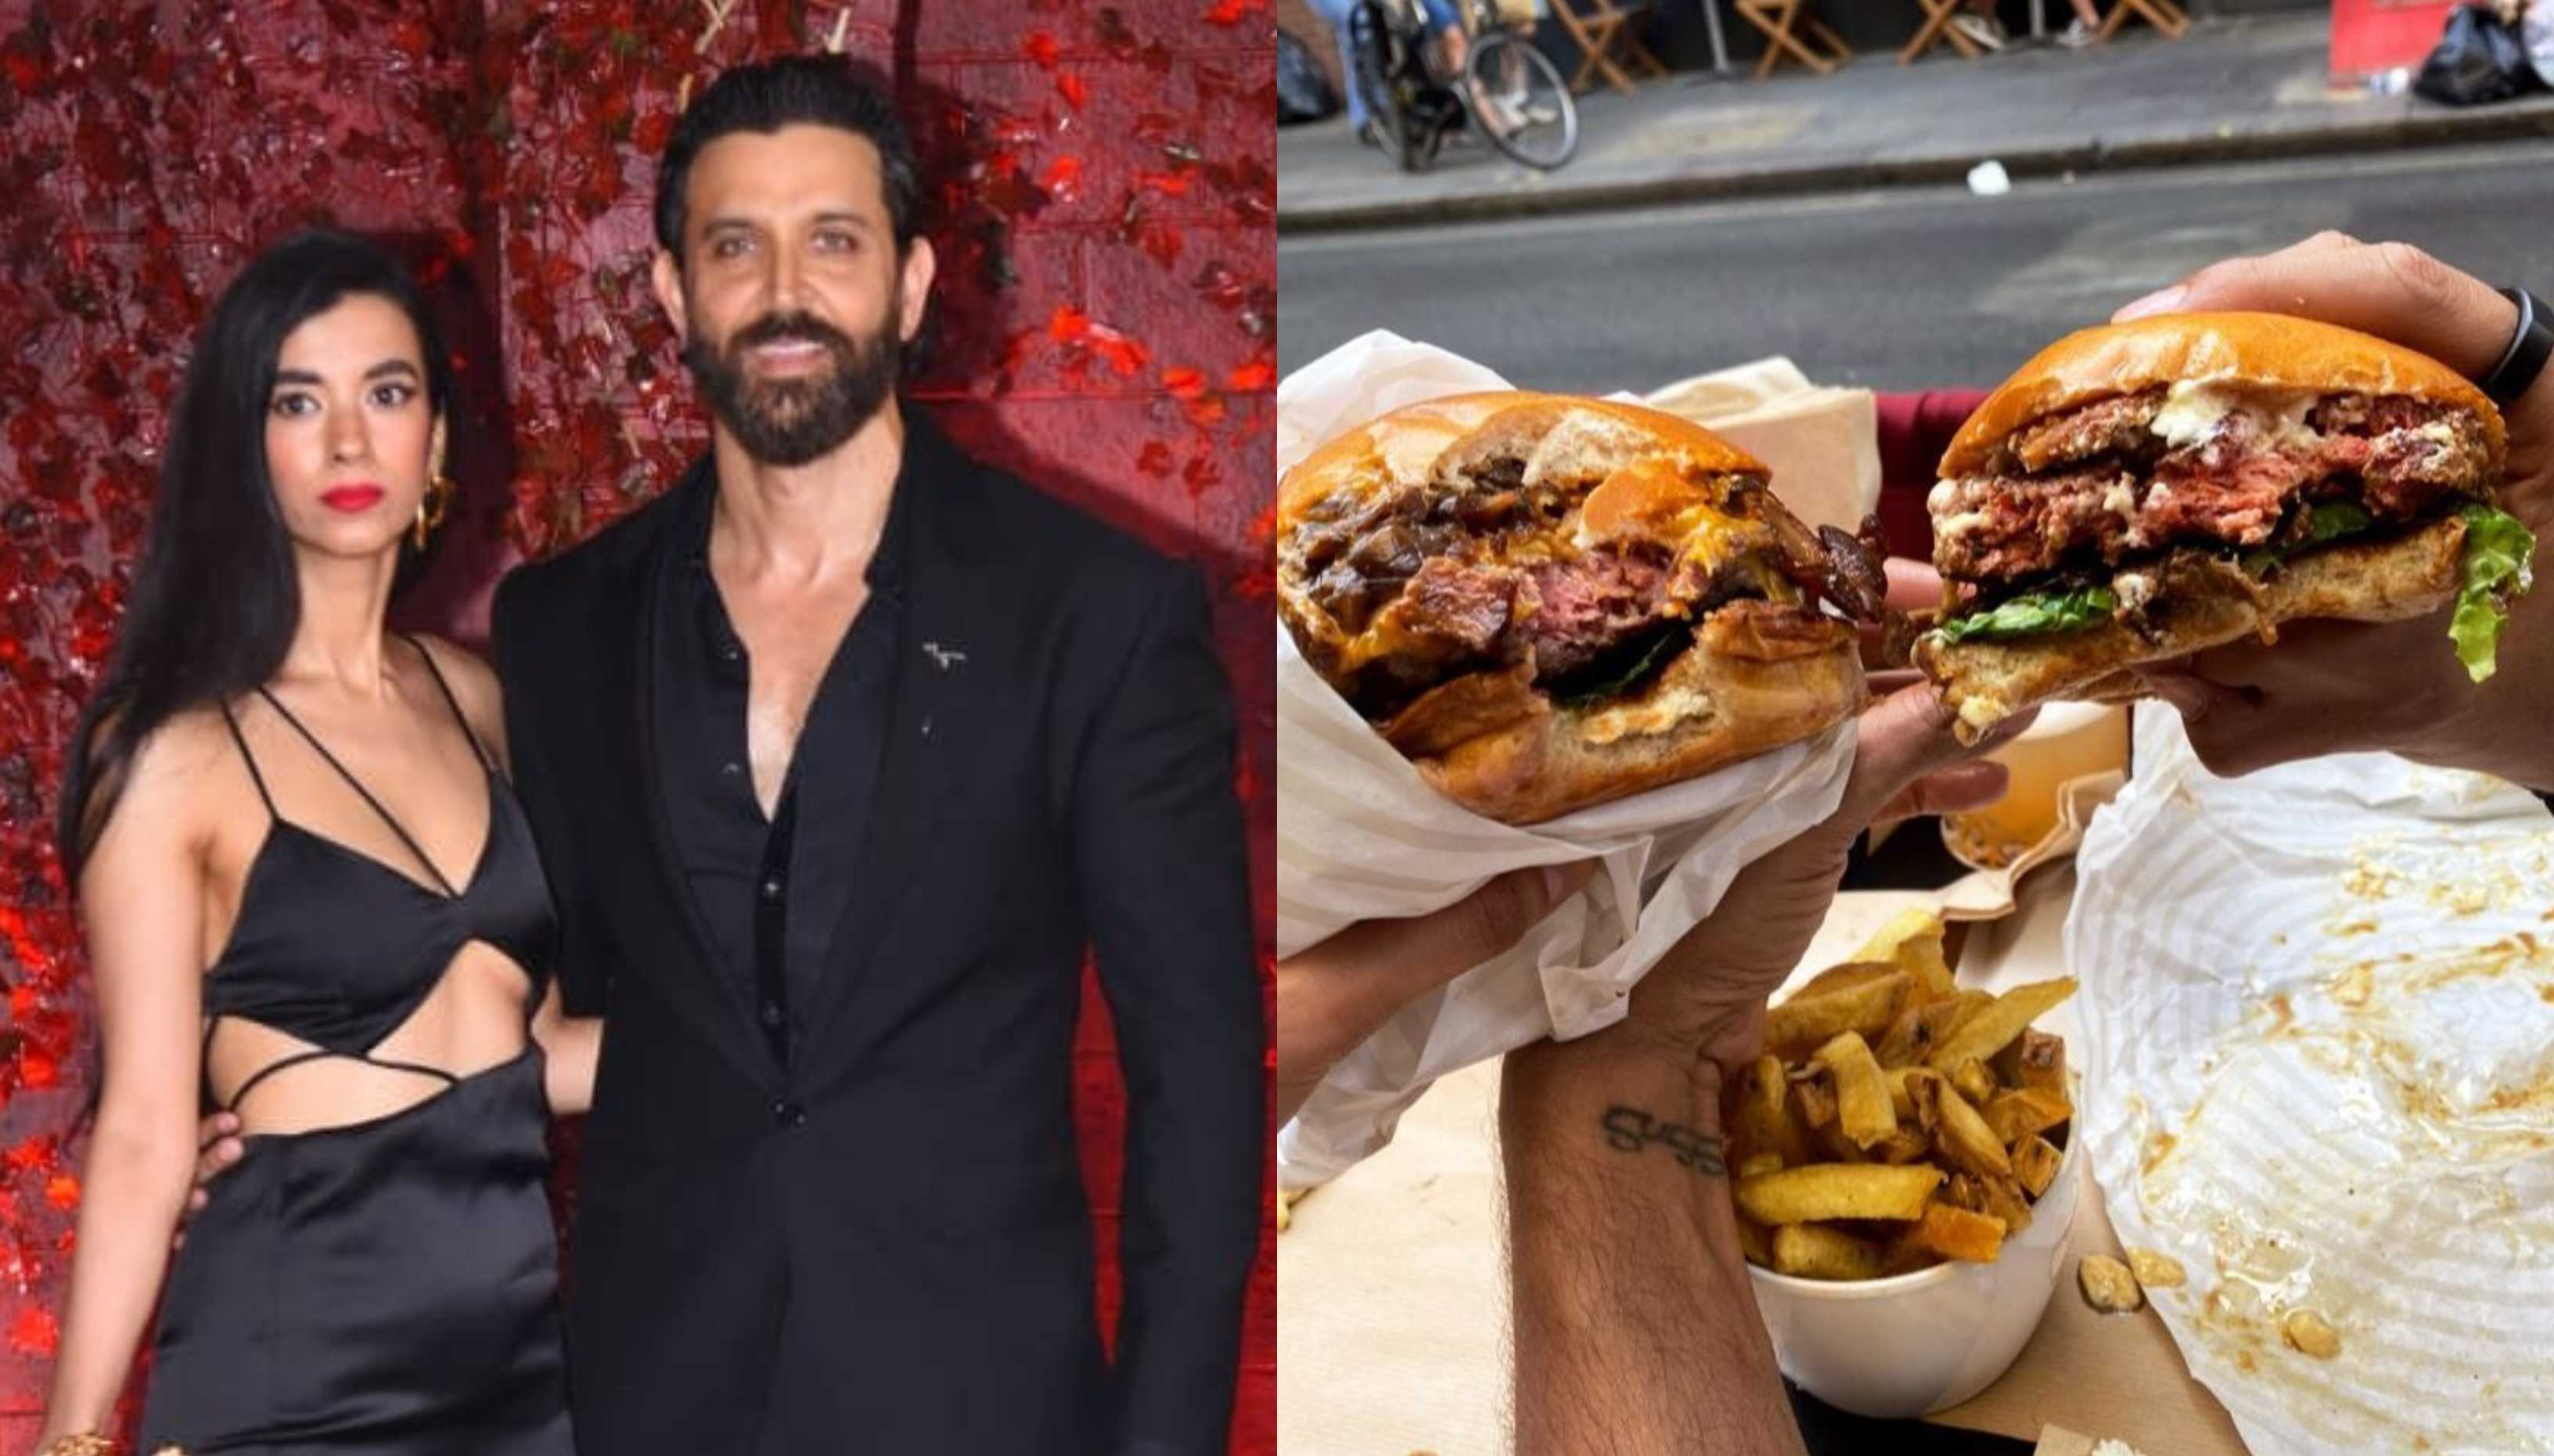 After Paris, Hrithik Roshan and Saba Azad make a stop in London to feast on burgers